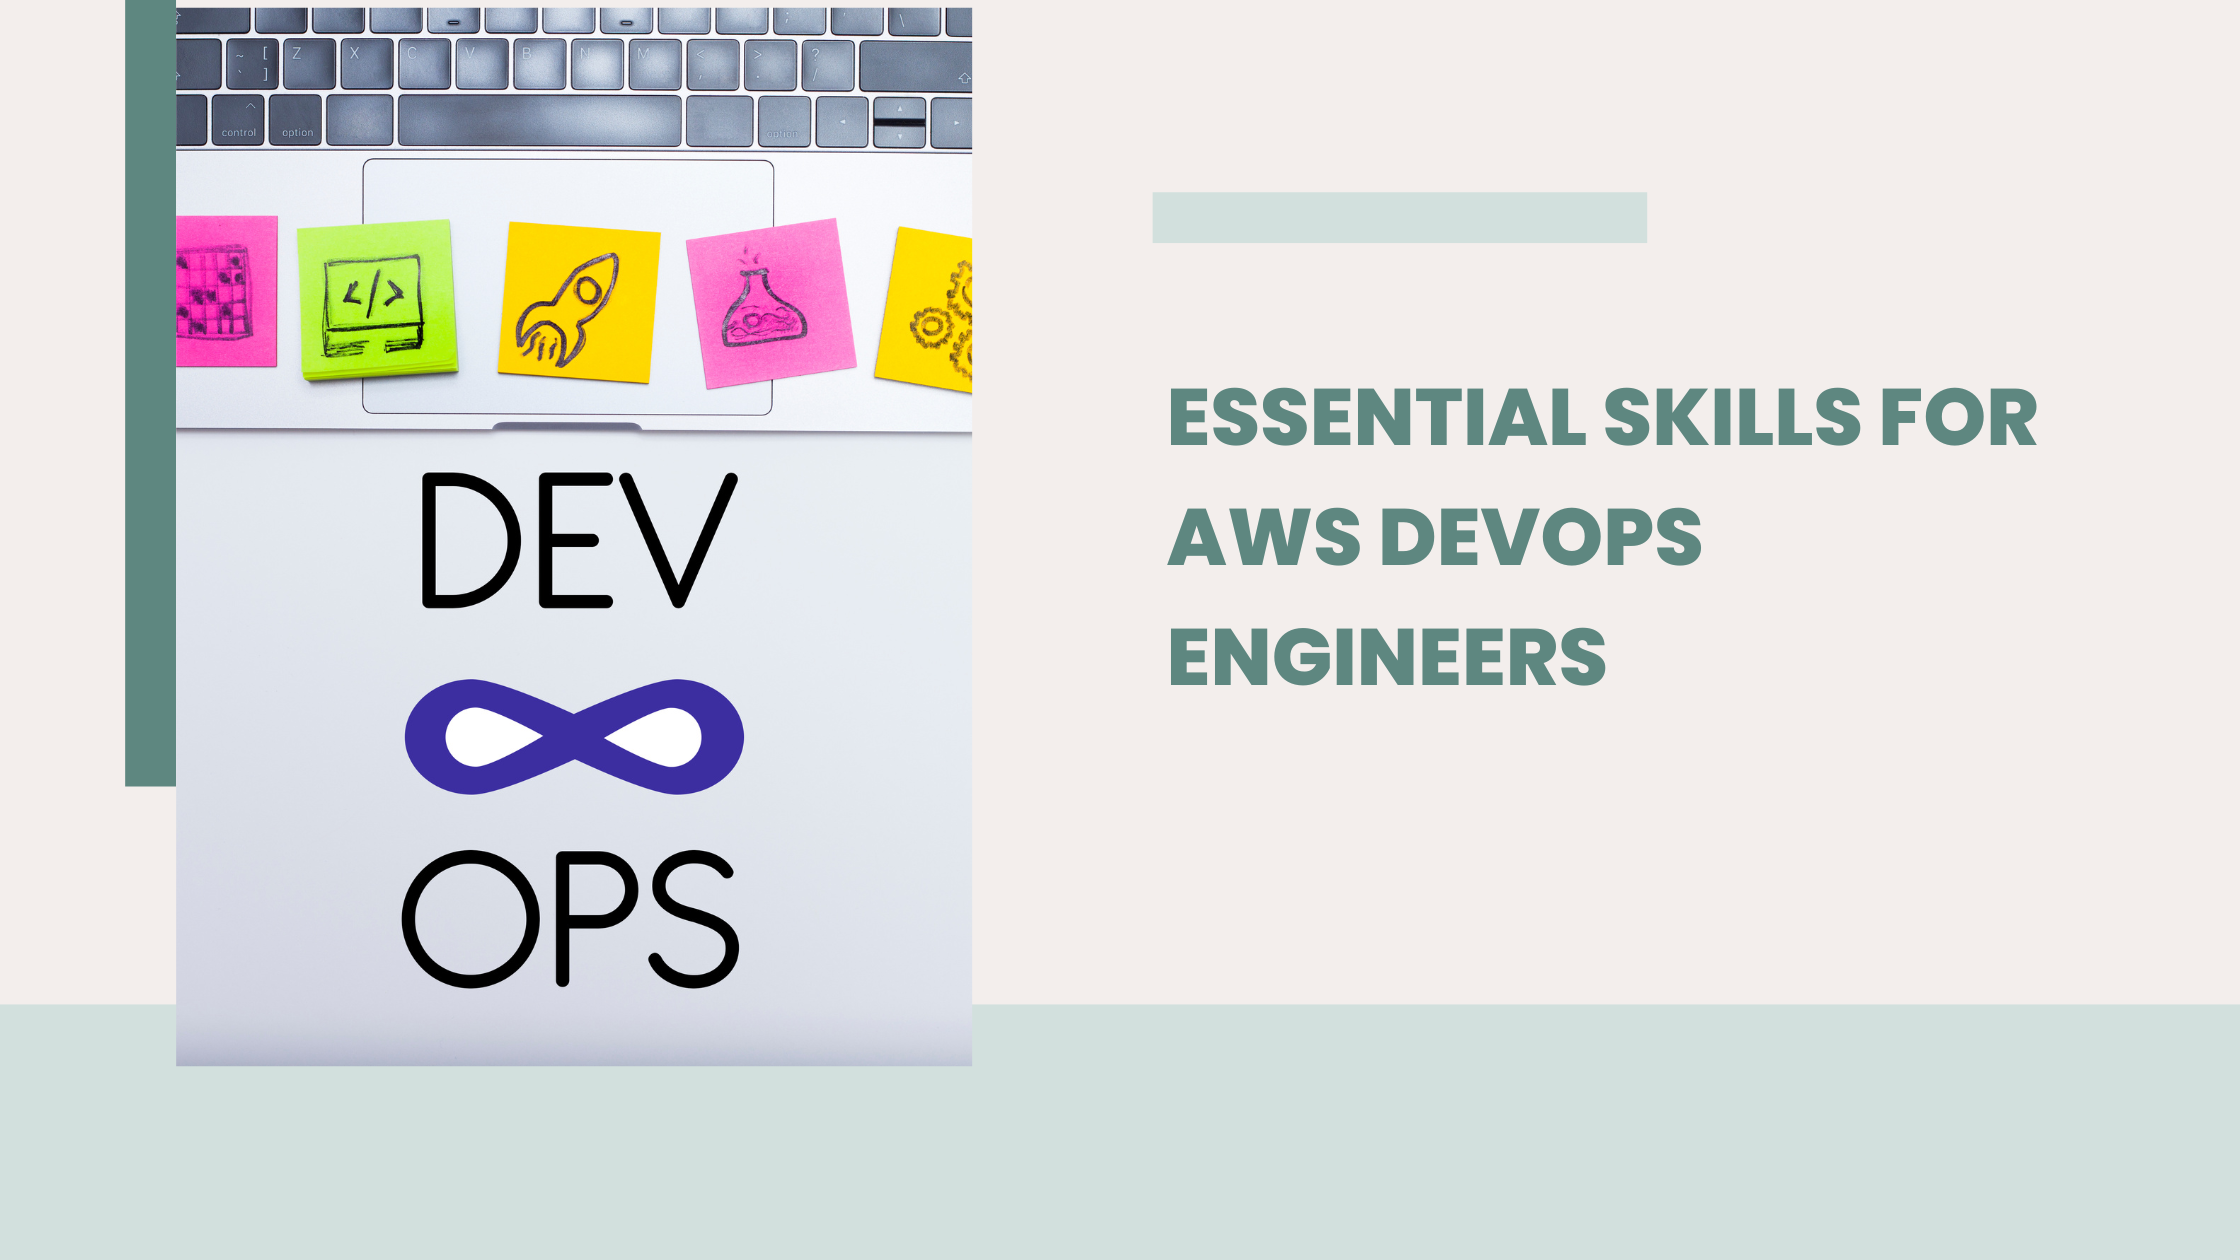 What Are the Essential Skills for AWS DevOps Engineers?